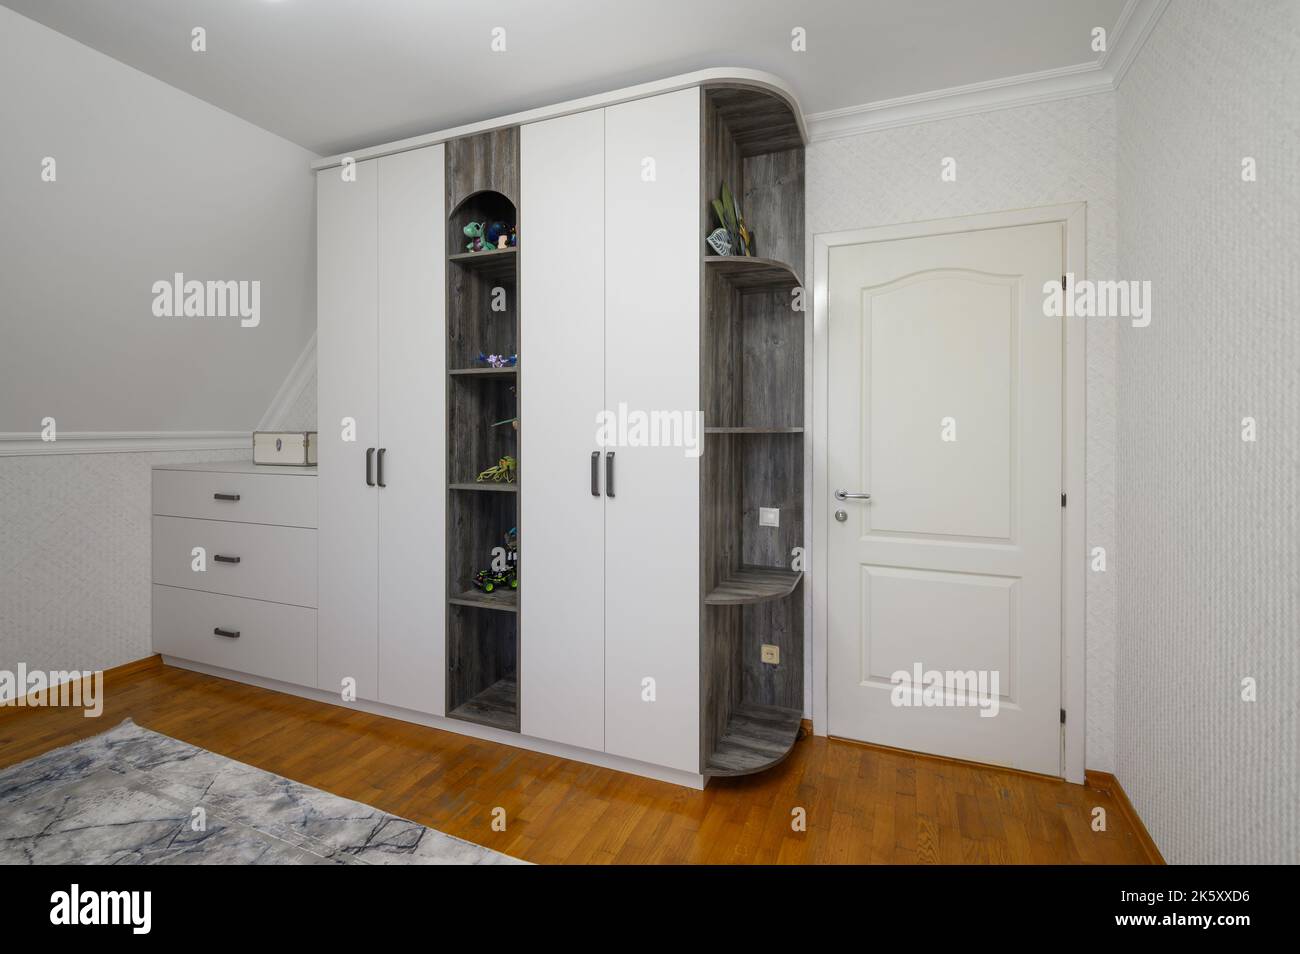 Large white cabinet in living room with wooden floor Stock Photo